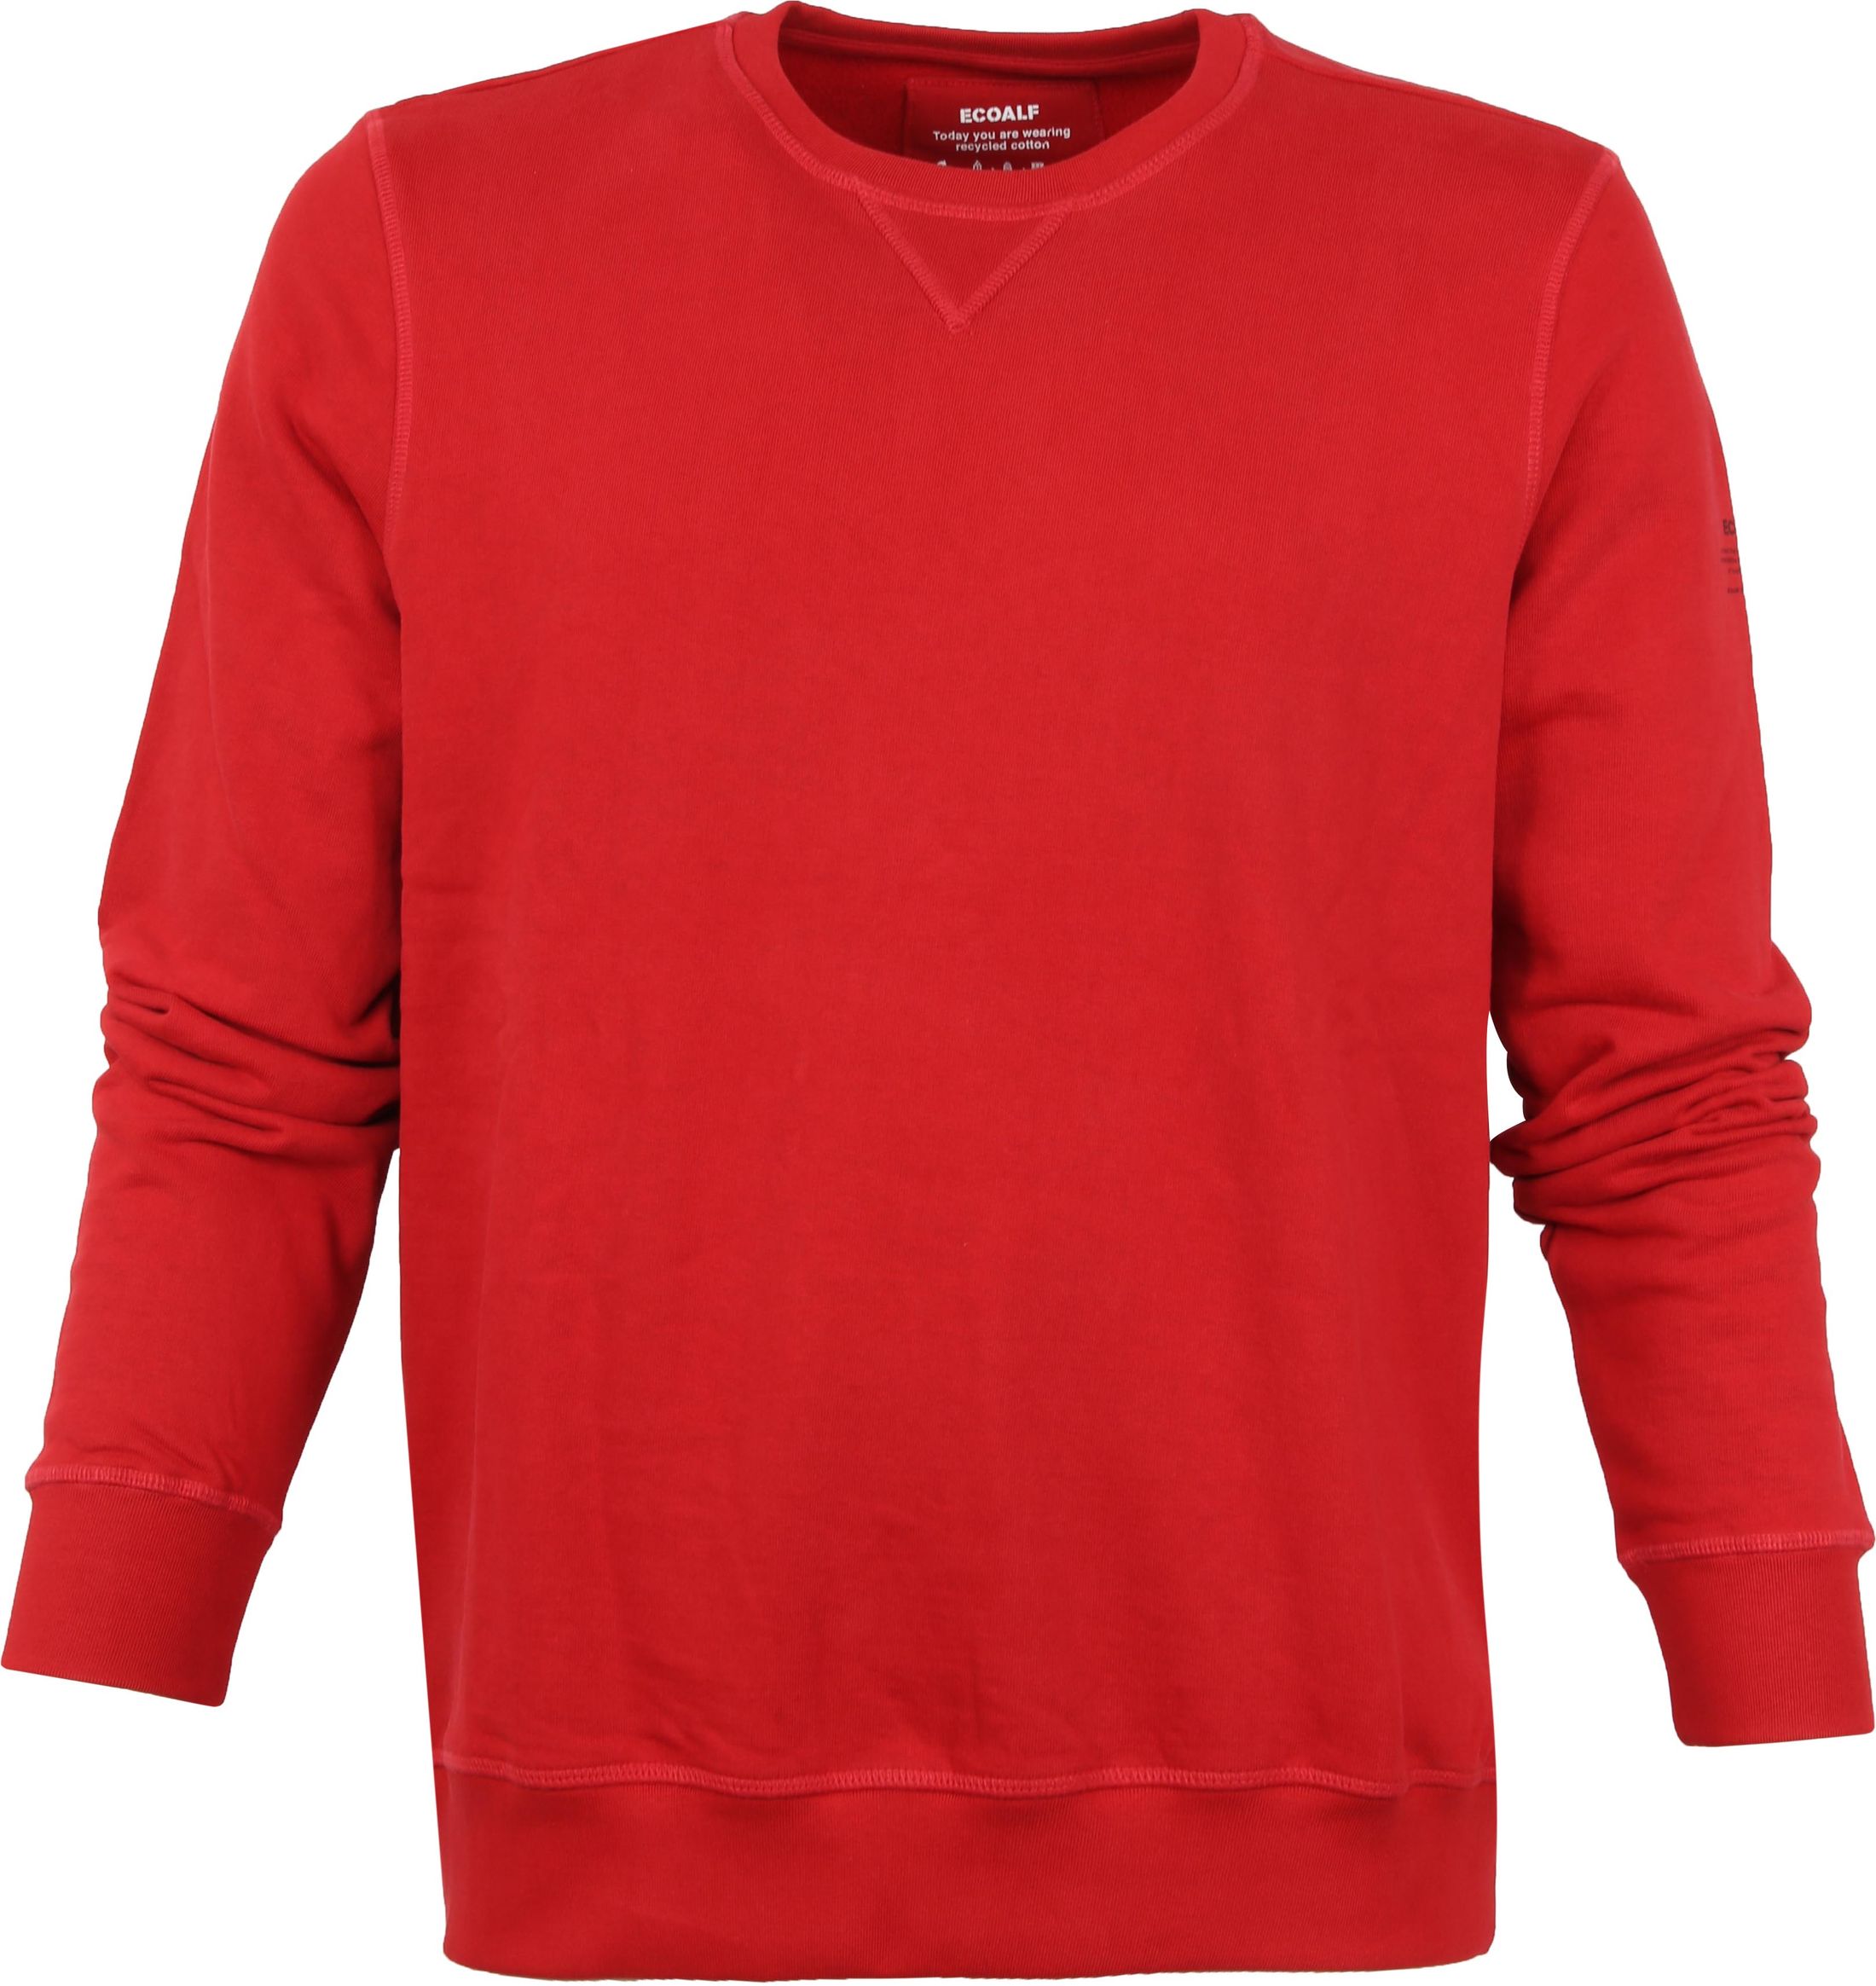 Ecoalf San Diego Rood Sweater Red size L